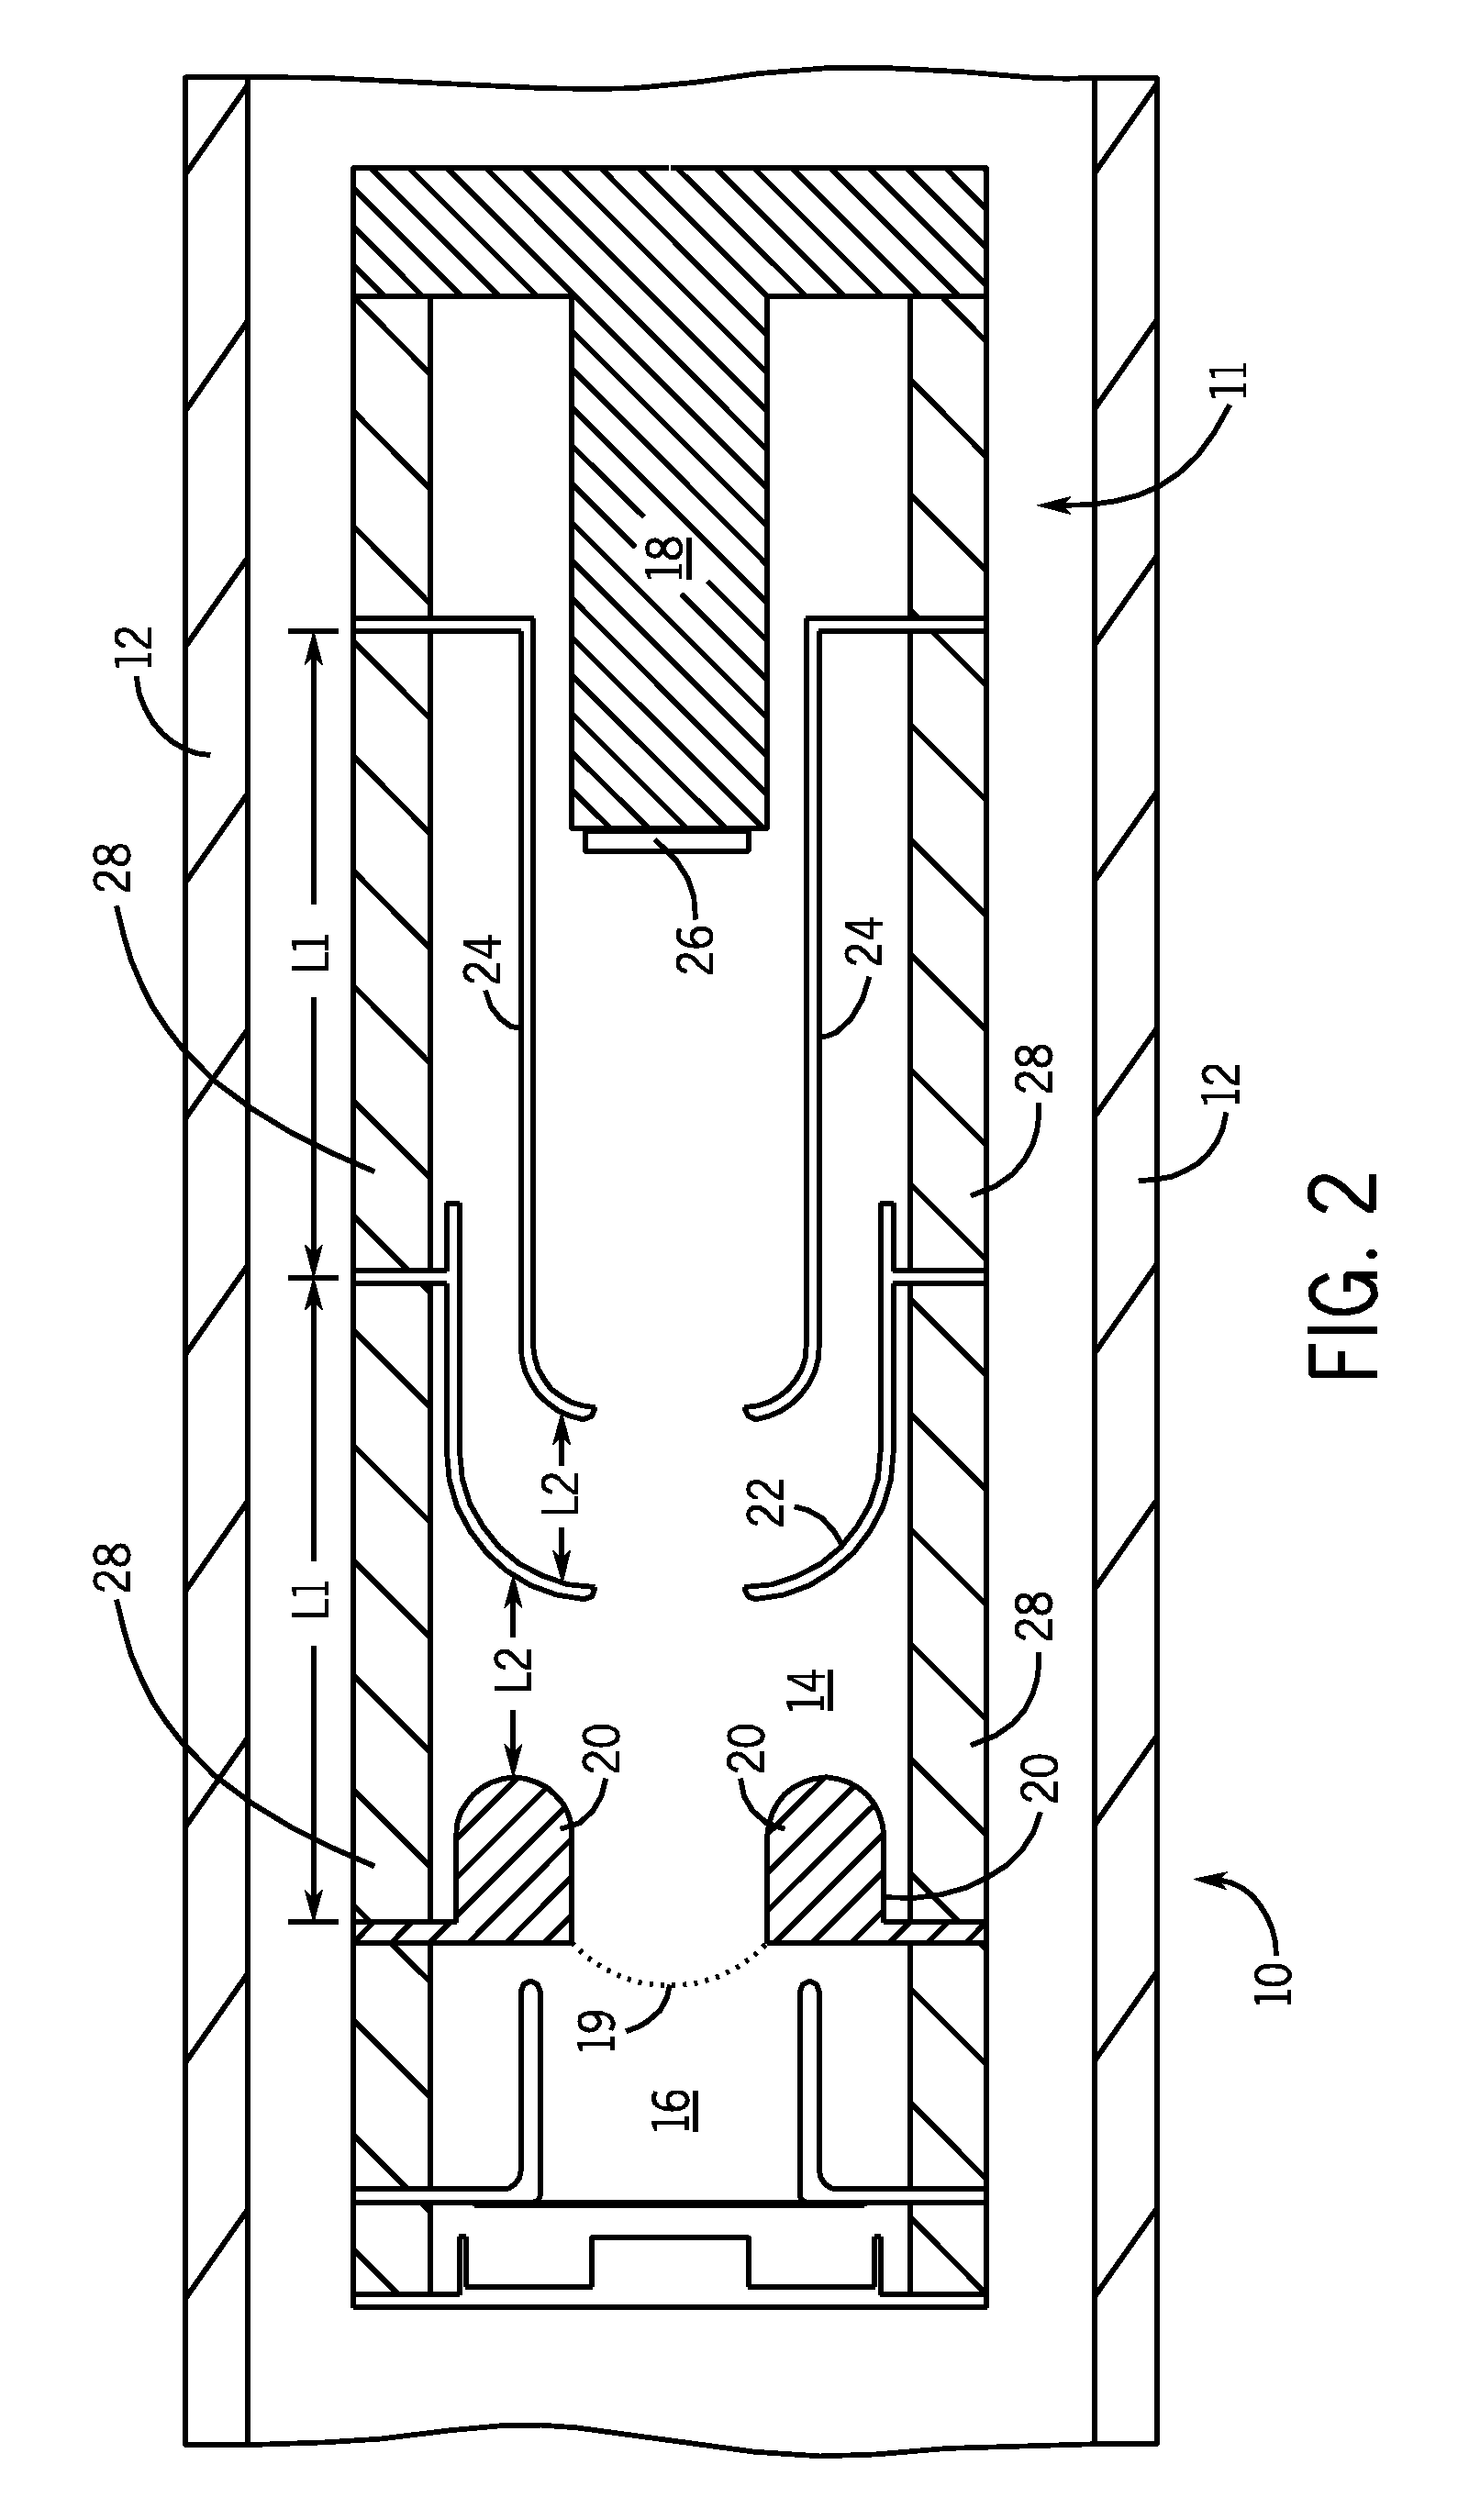 Floating Intermediate Electrode Configuration for Downhole Nuclear Radiation Generator